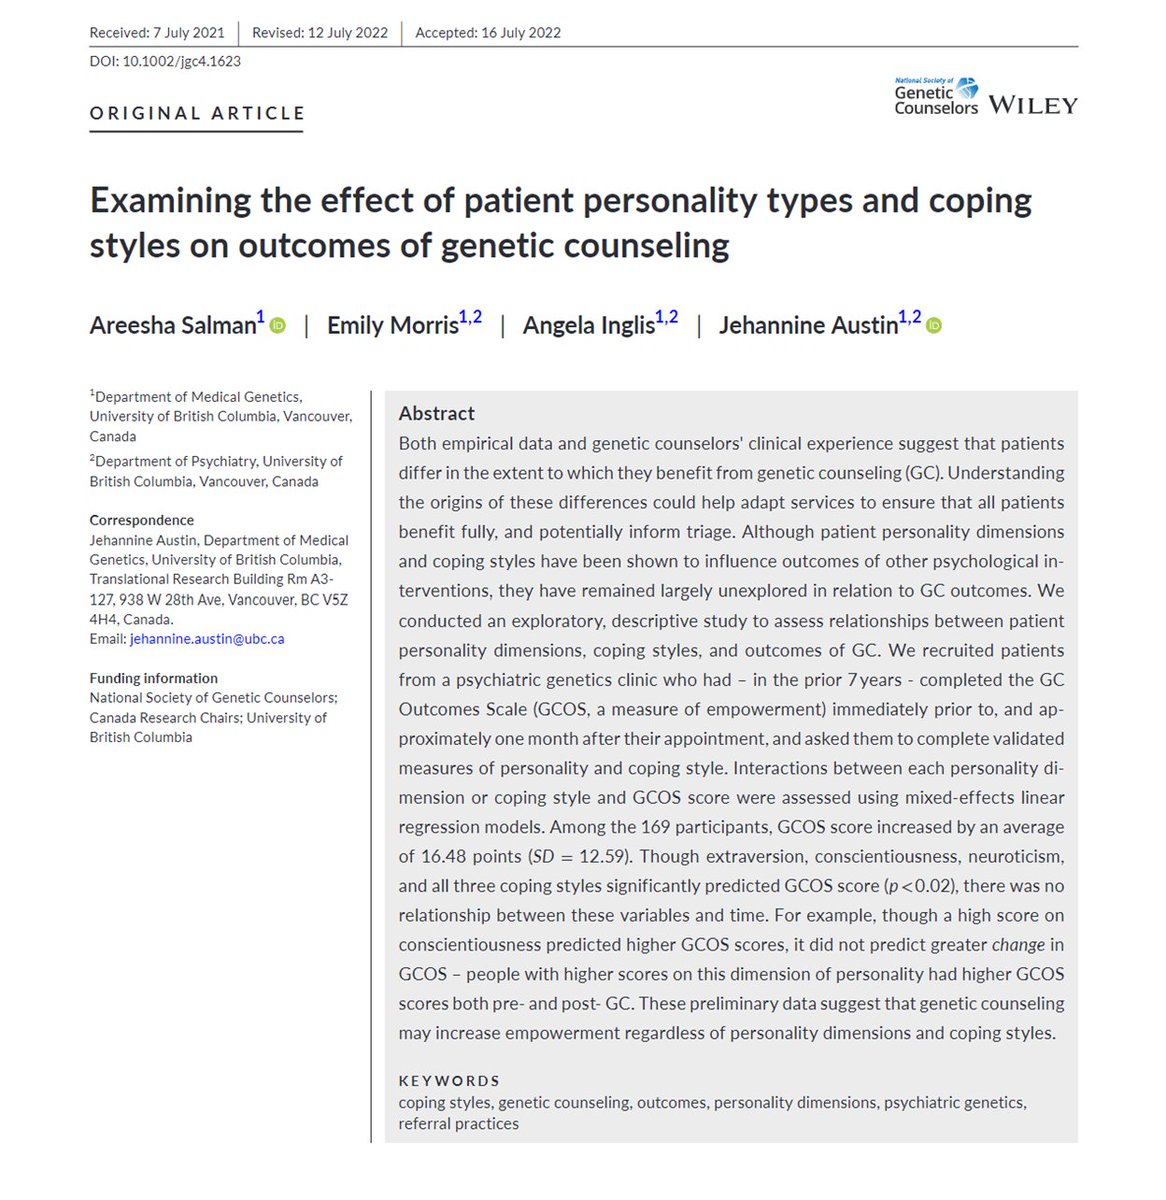 I’m so excited to share my directed studies work, now published in the Journal of Genetic Counseling! @J9_Austin, @EMM_GC, @Inglis_Angela, and I studied the relationship between personality dimensions/coping styles and GC outcomes: doi.org/10.1002/jgc4.1… #GCChat (1/9)